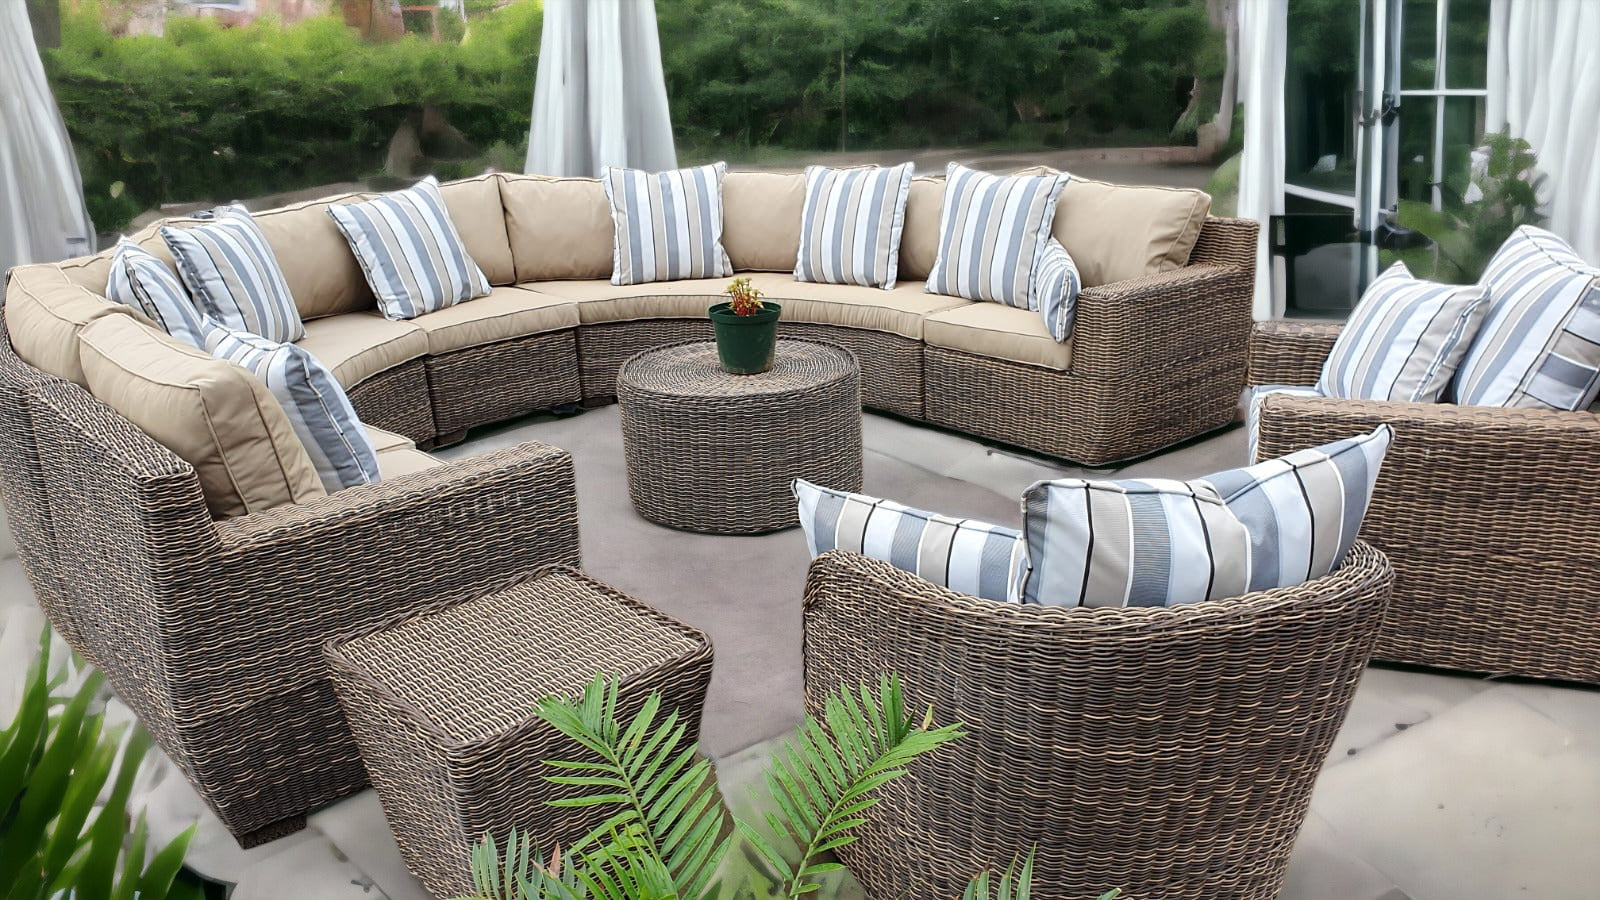 Outdoor furniture sofa set The Boma Moon curved Design